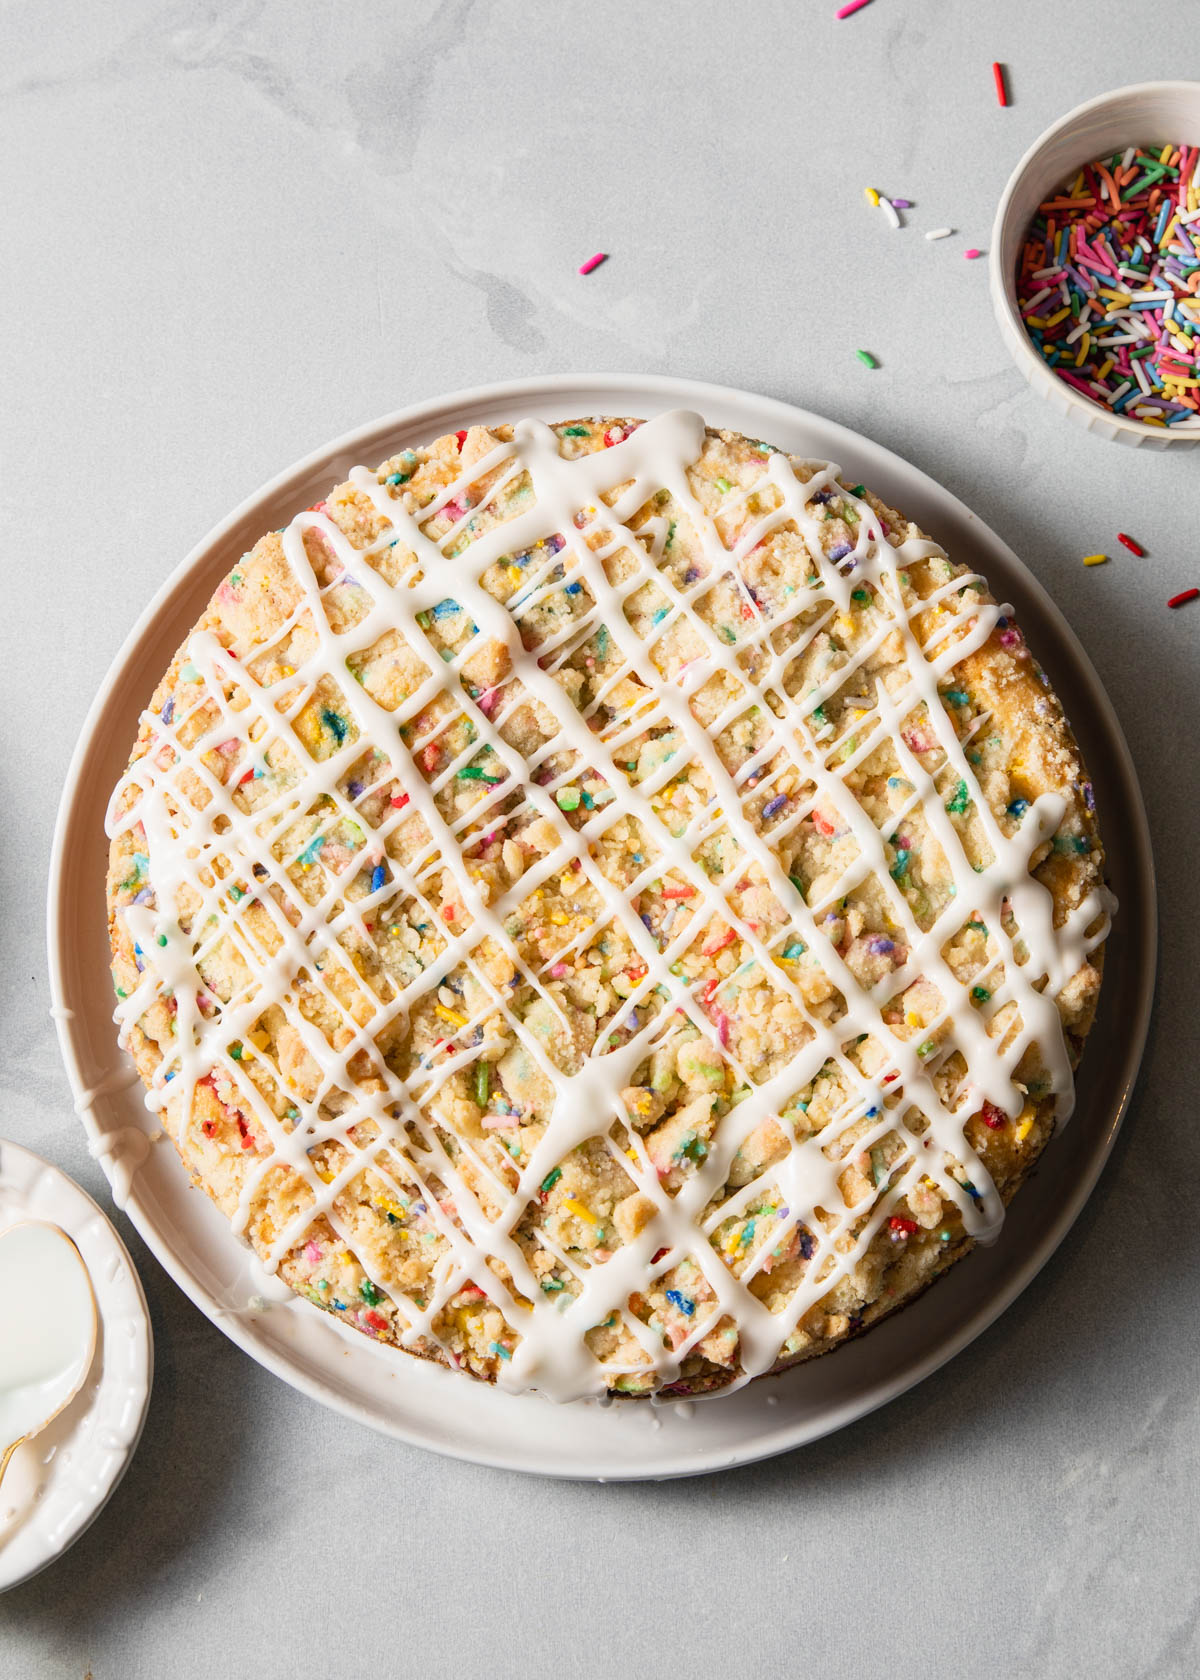 A coffee cake with sprinkles on top and vanilla glaze